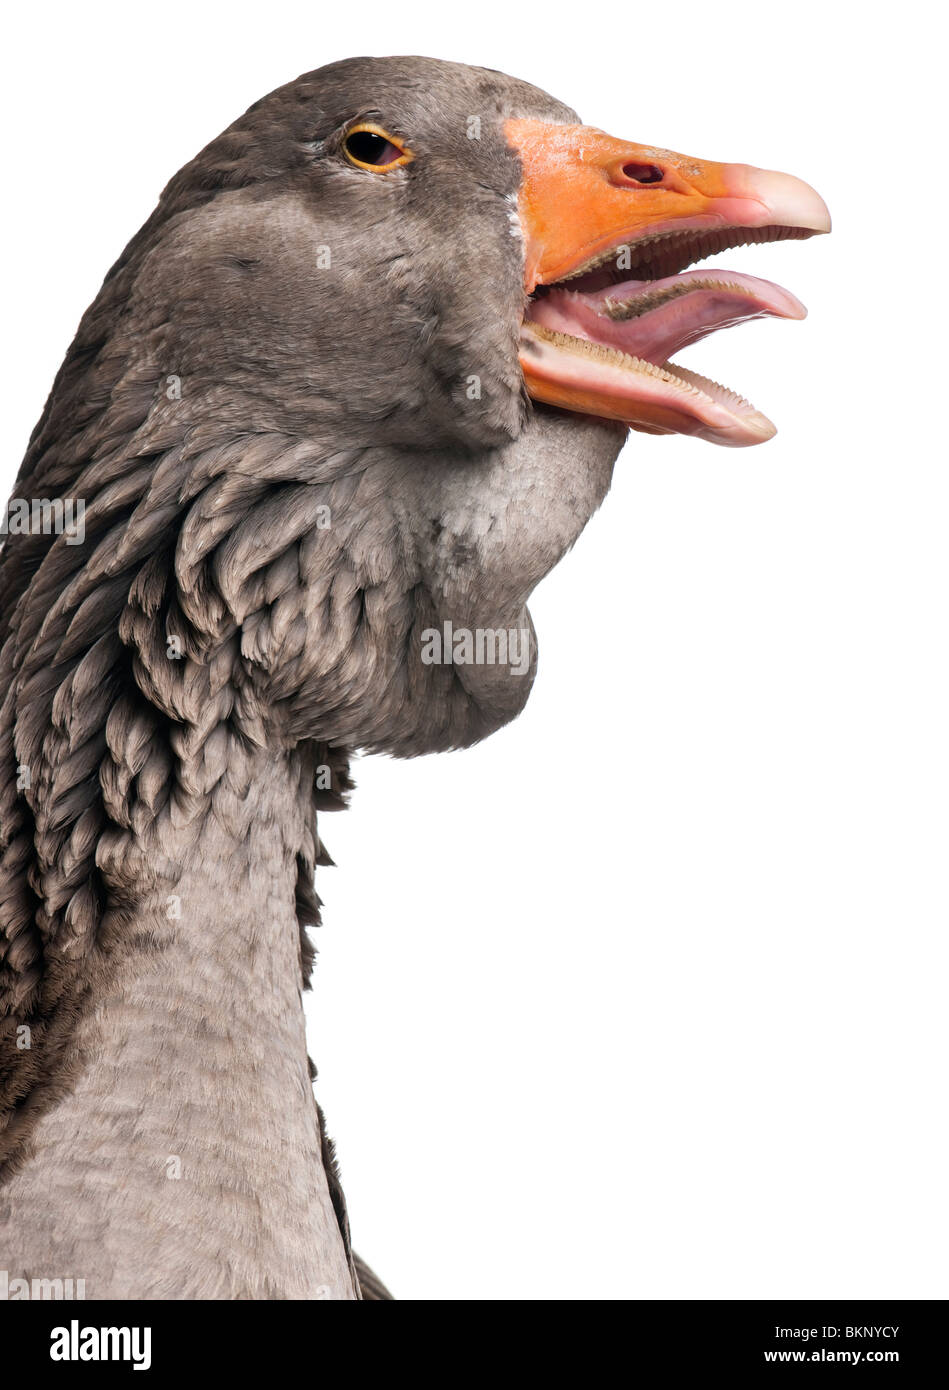 Toulouse goose in front of white background, studio shot Stock Photo